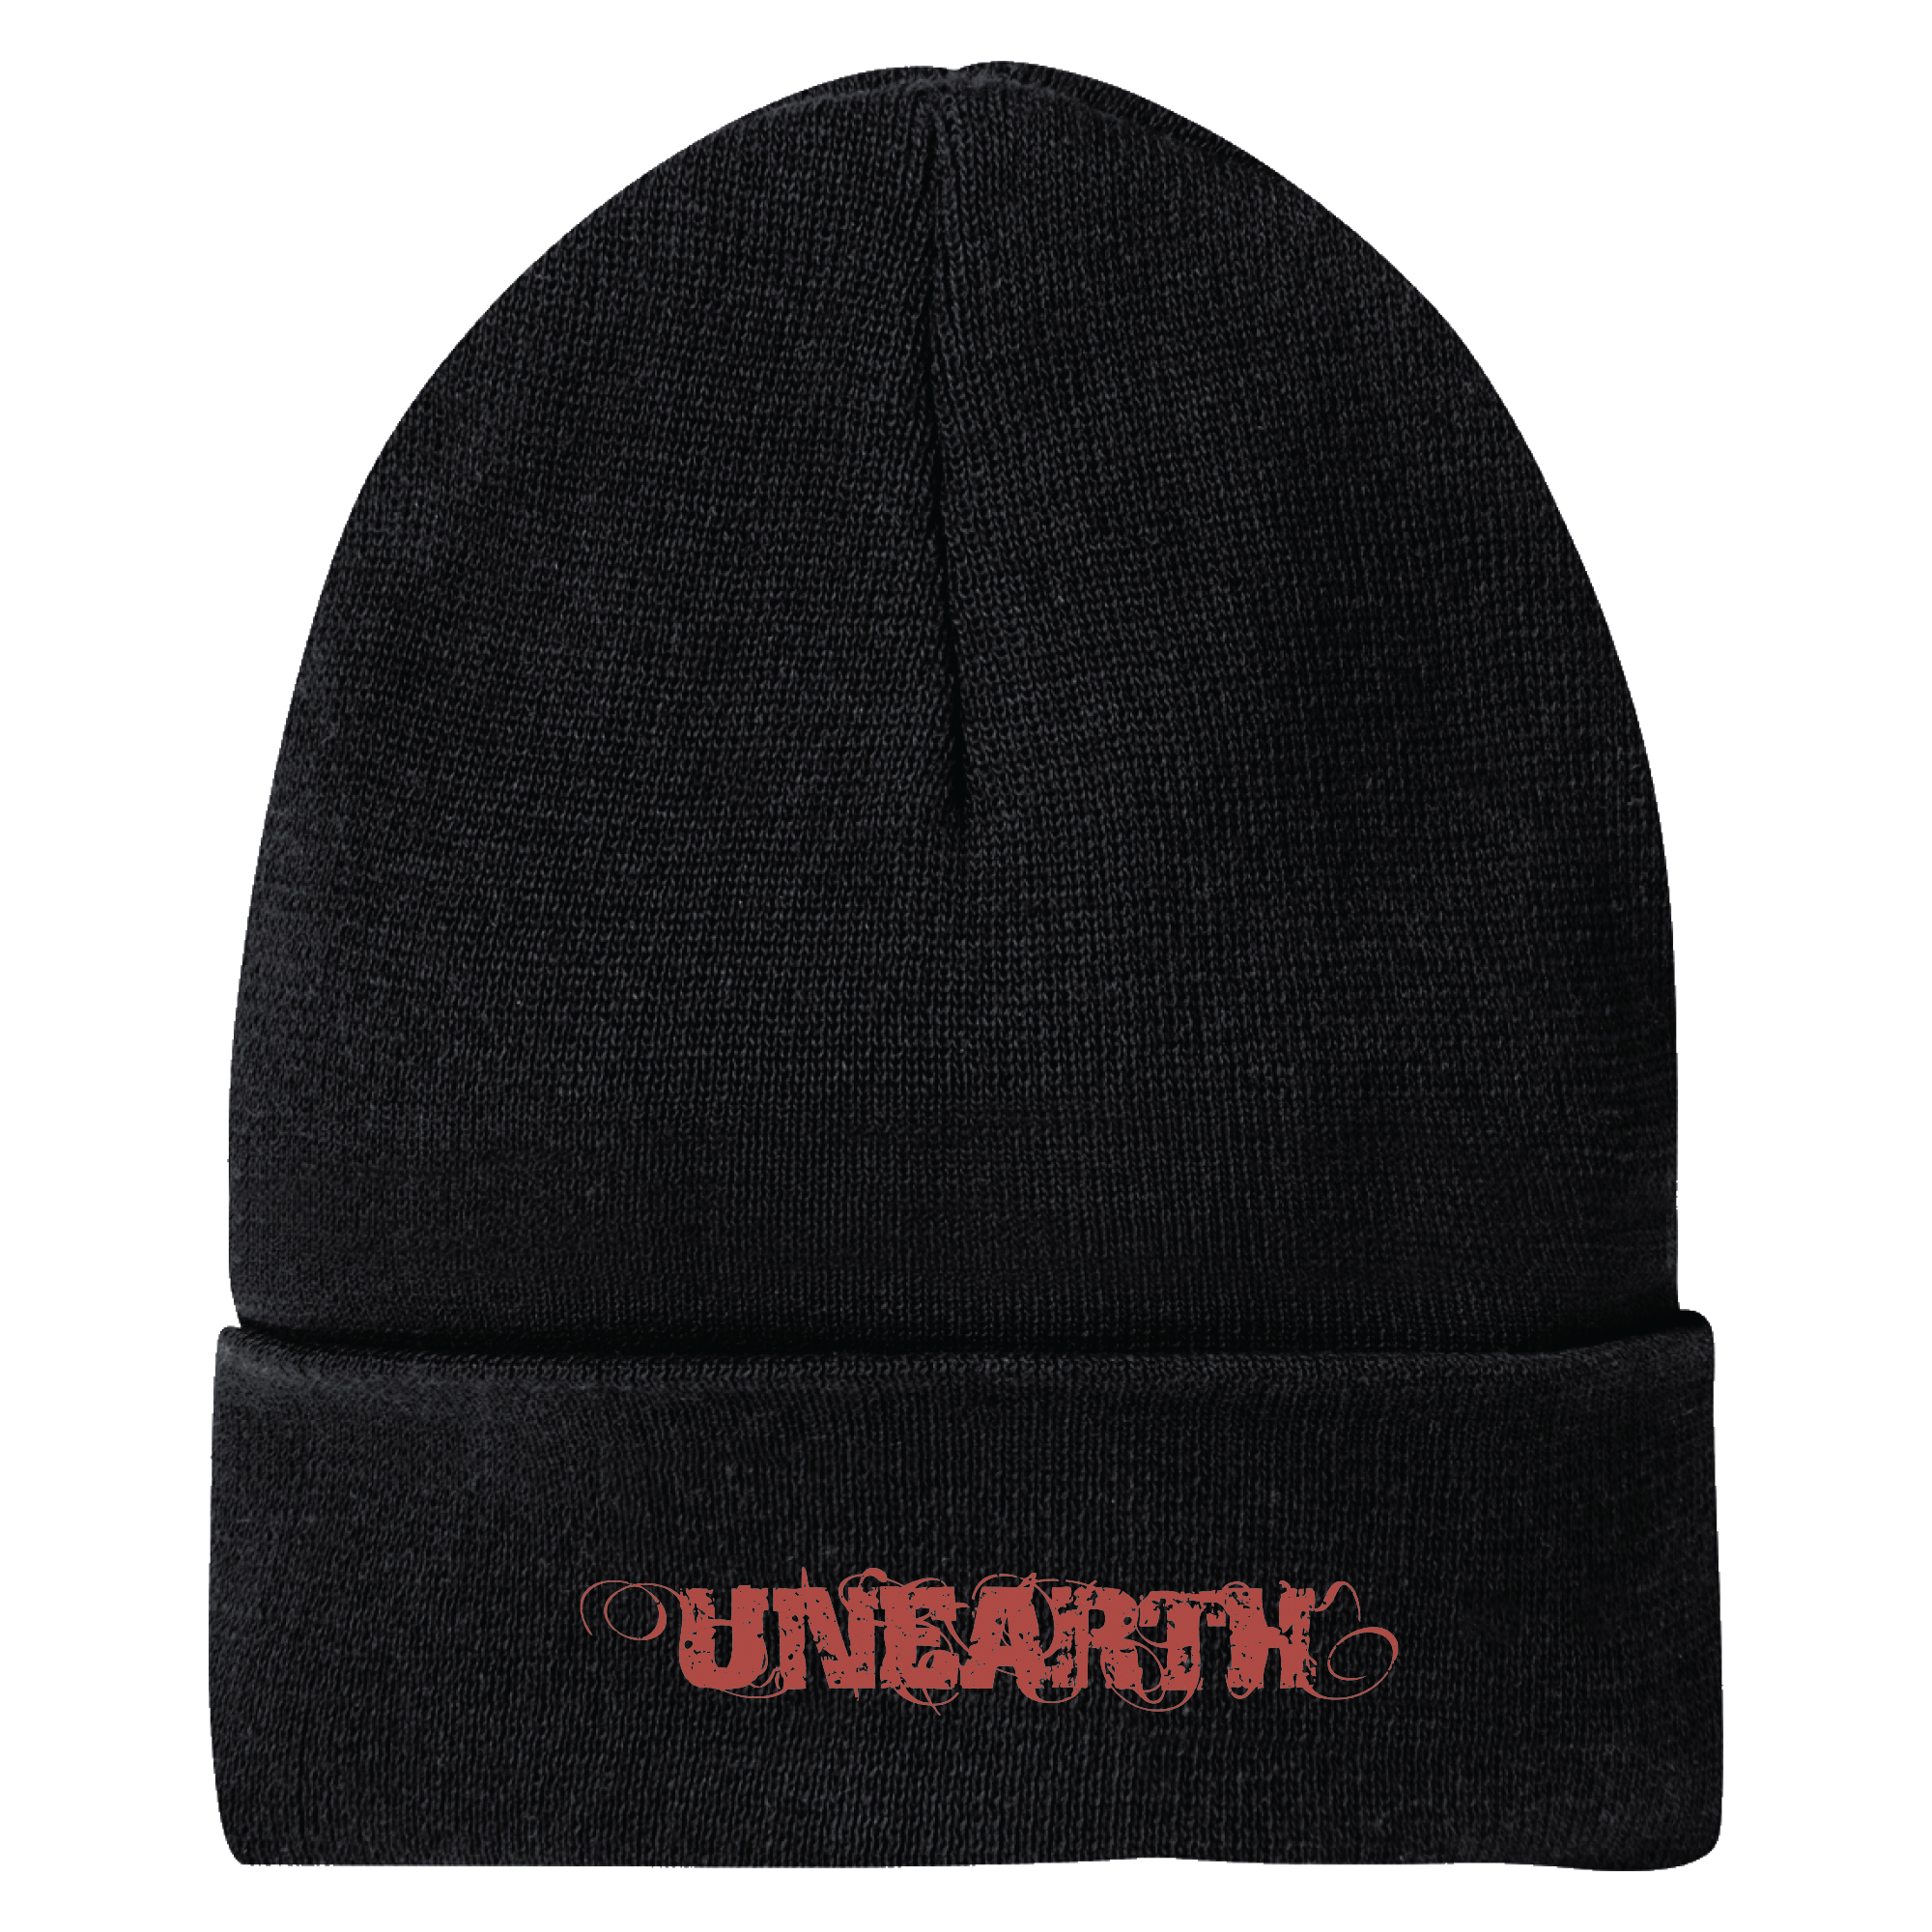 The Wretched ; The Ruinous Beanie